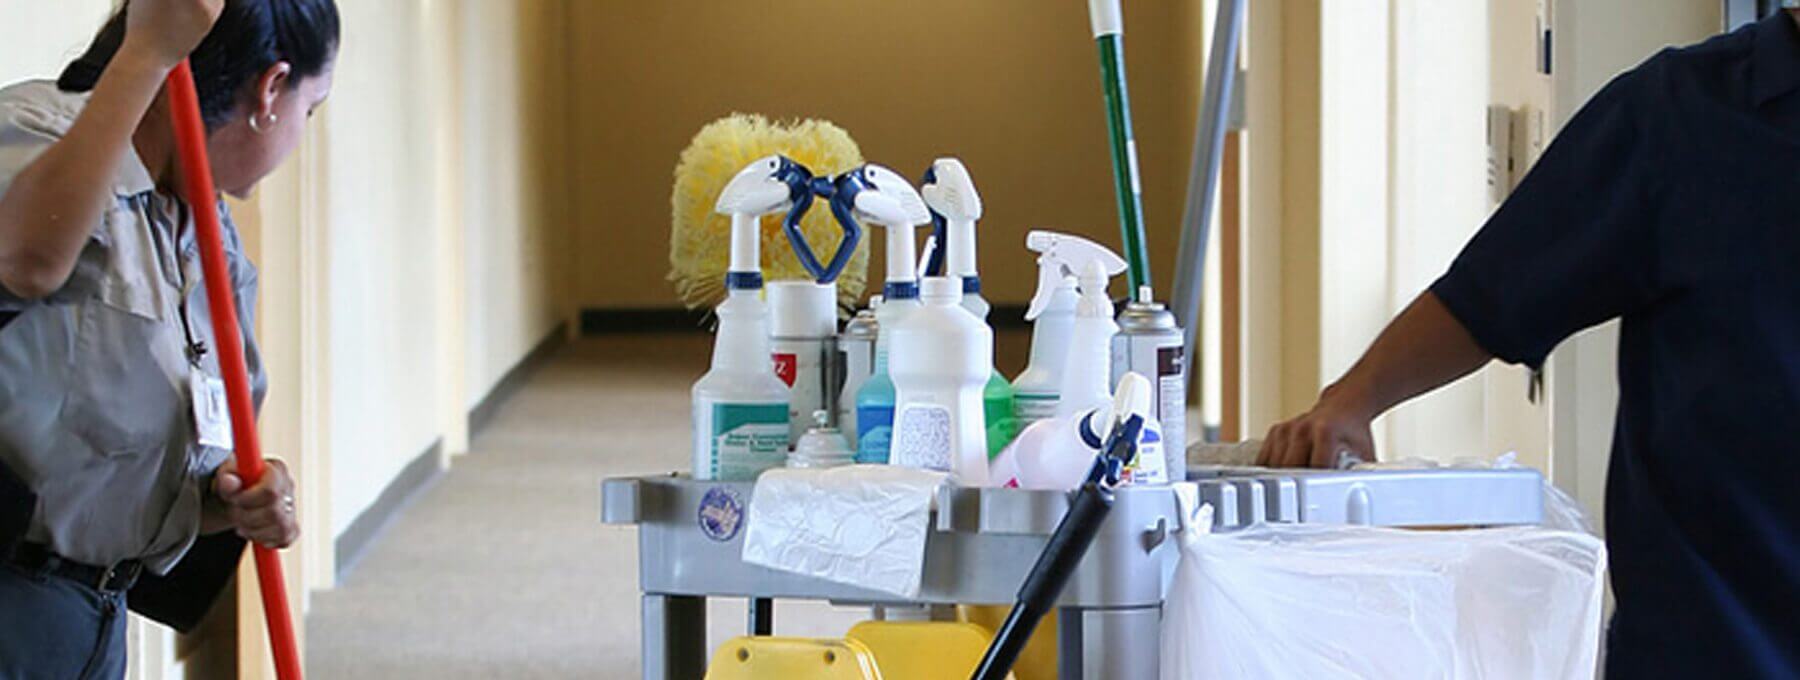 CleadAid Direct - Cleaning Services Wellington